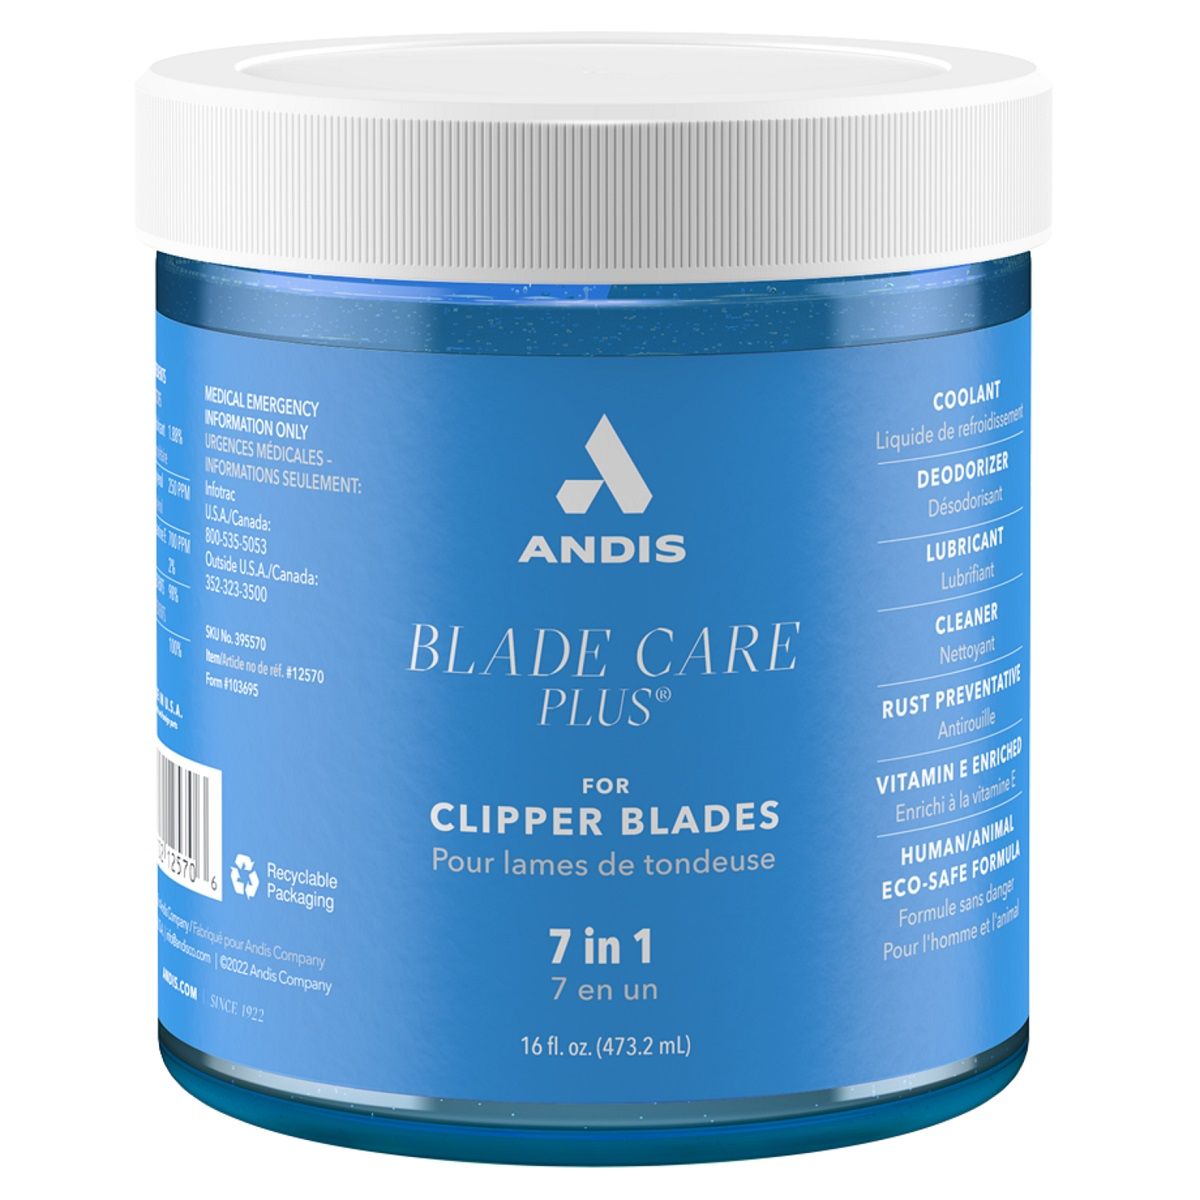 Andis Blade Care Plus for Clipper Blades - Jar 16oz #12570